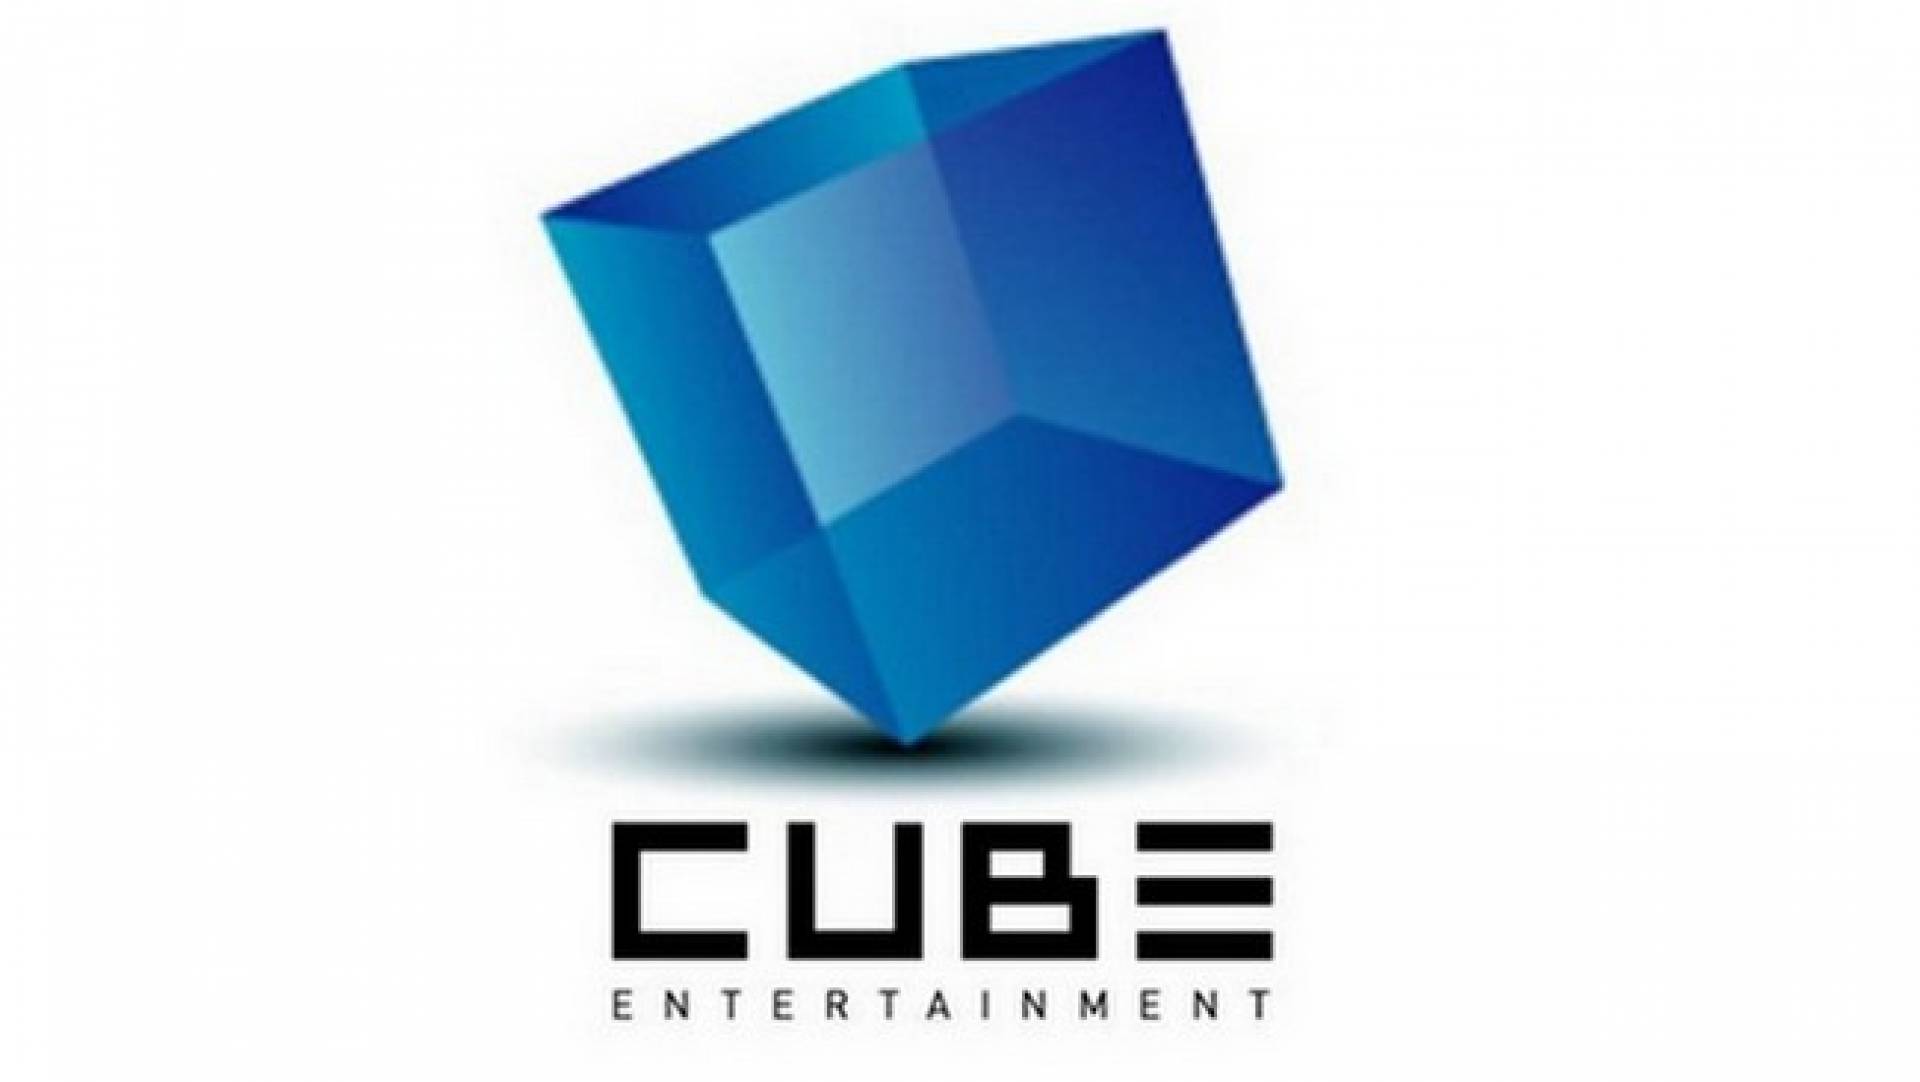 Teaser from Cube Entertainment